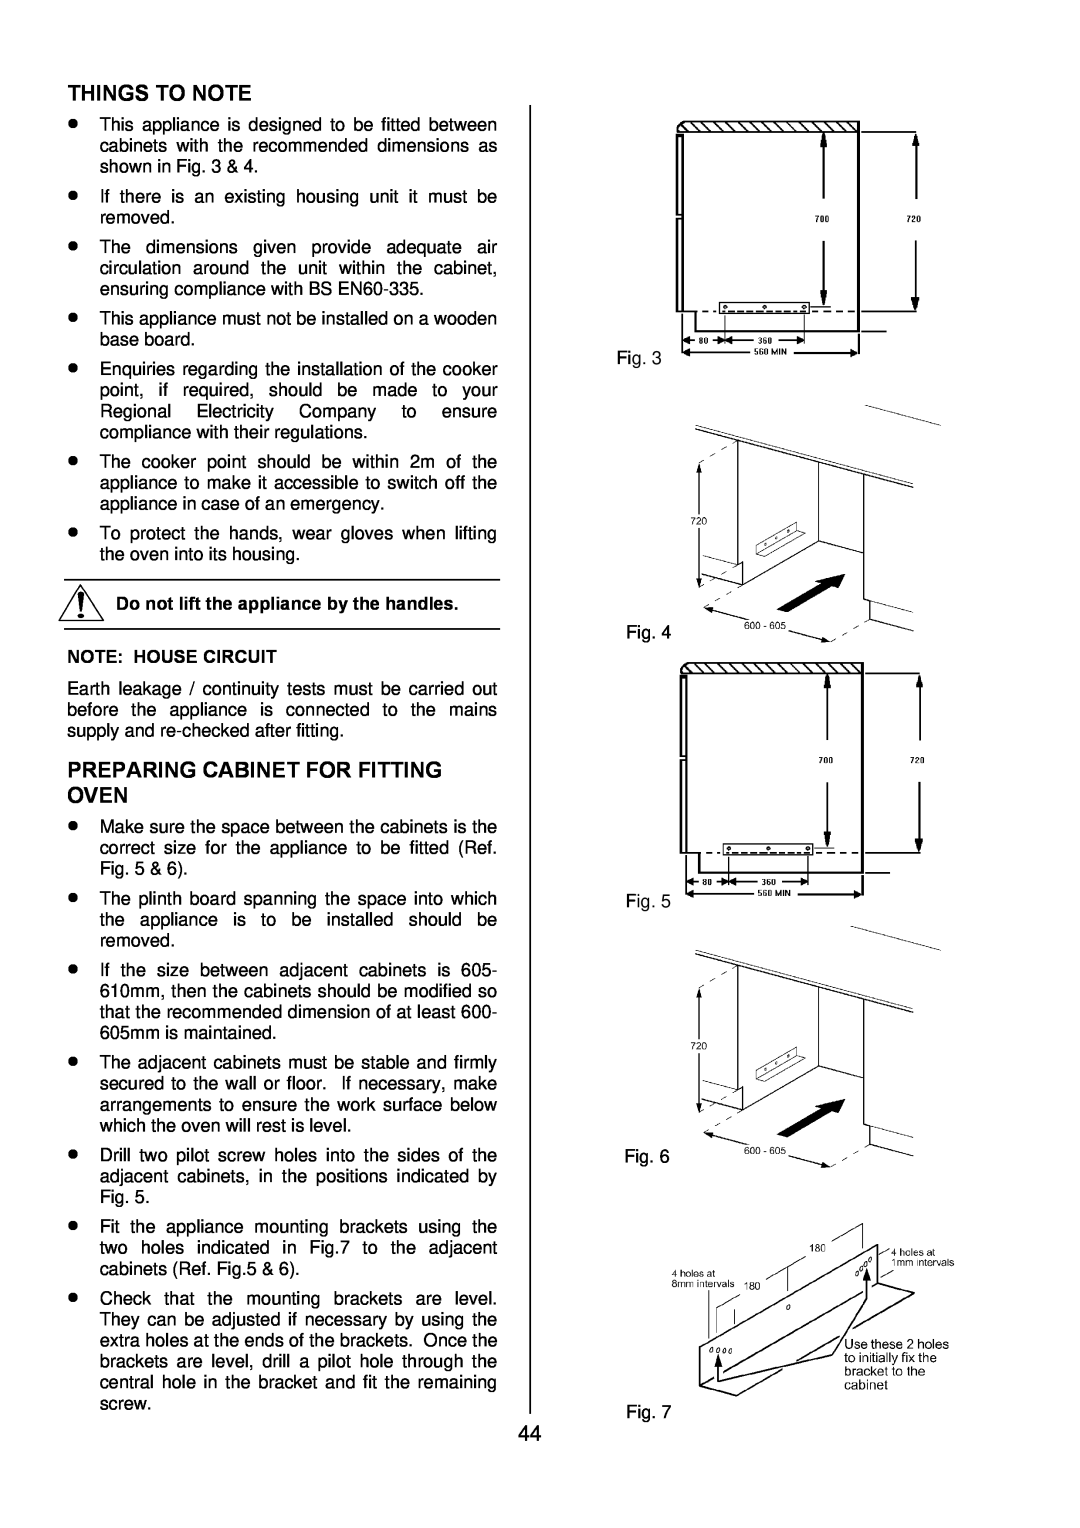 Zanussi ZUQ 875 manual Preparing Cabinet For Fitting Oven, Do not lift the appliance by the handles NOTE HOUSE CIRCUIT 